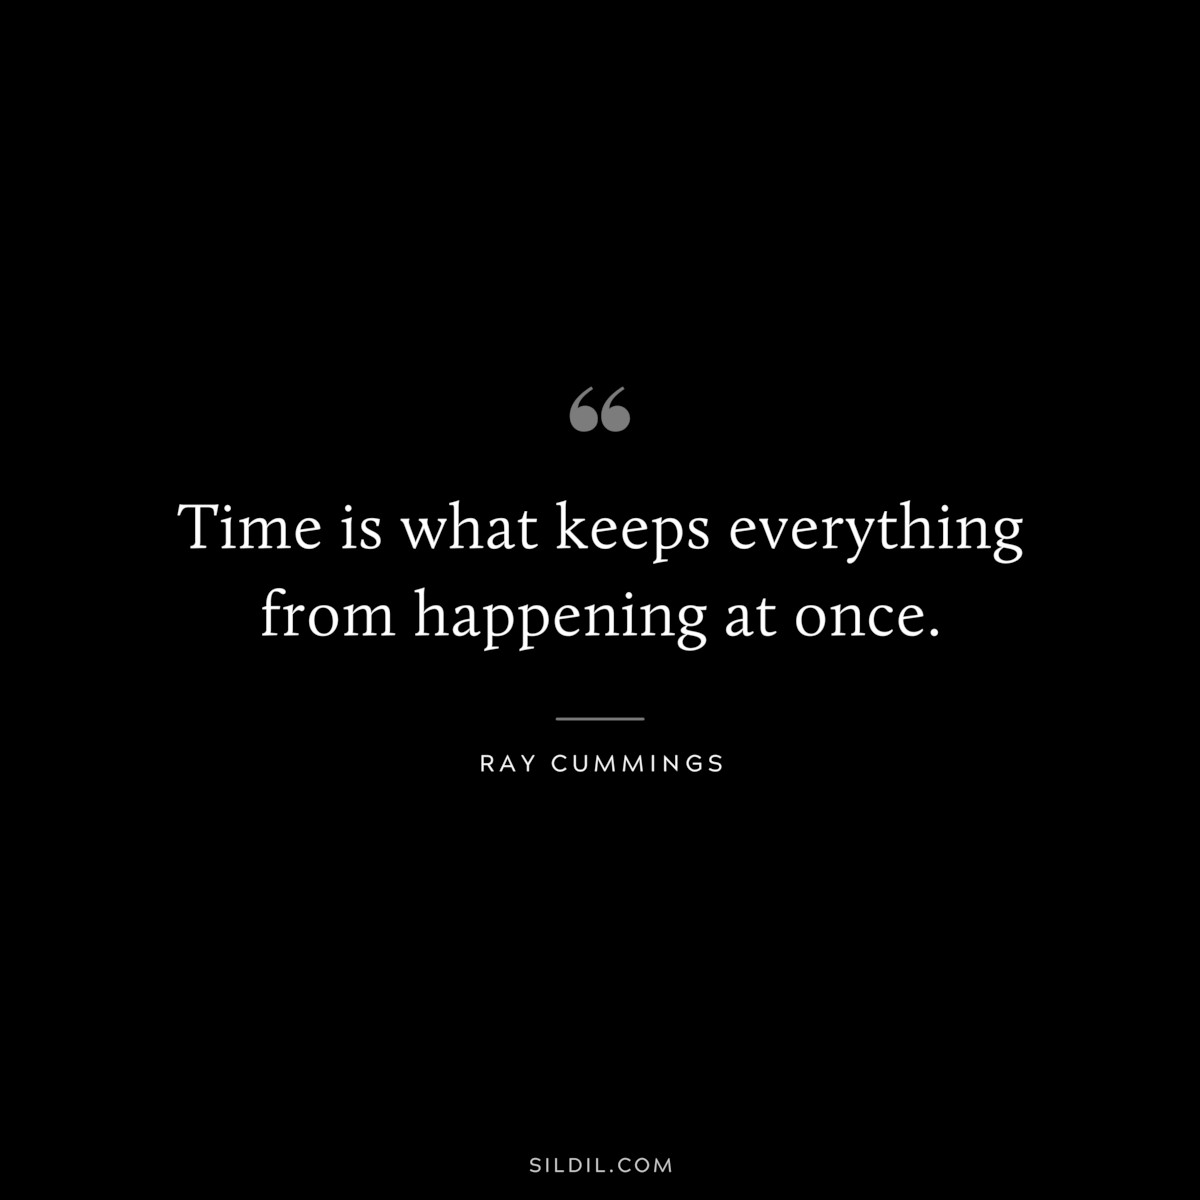 Time is what keeps everything from happening at once. ― Ray Cummings